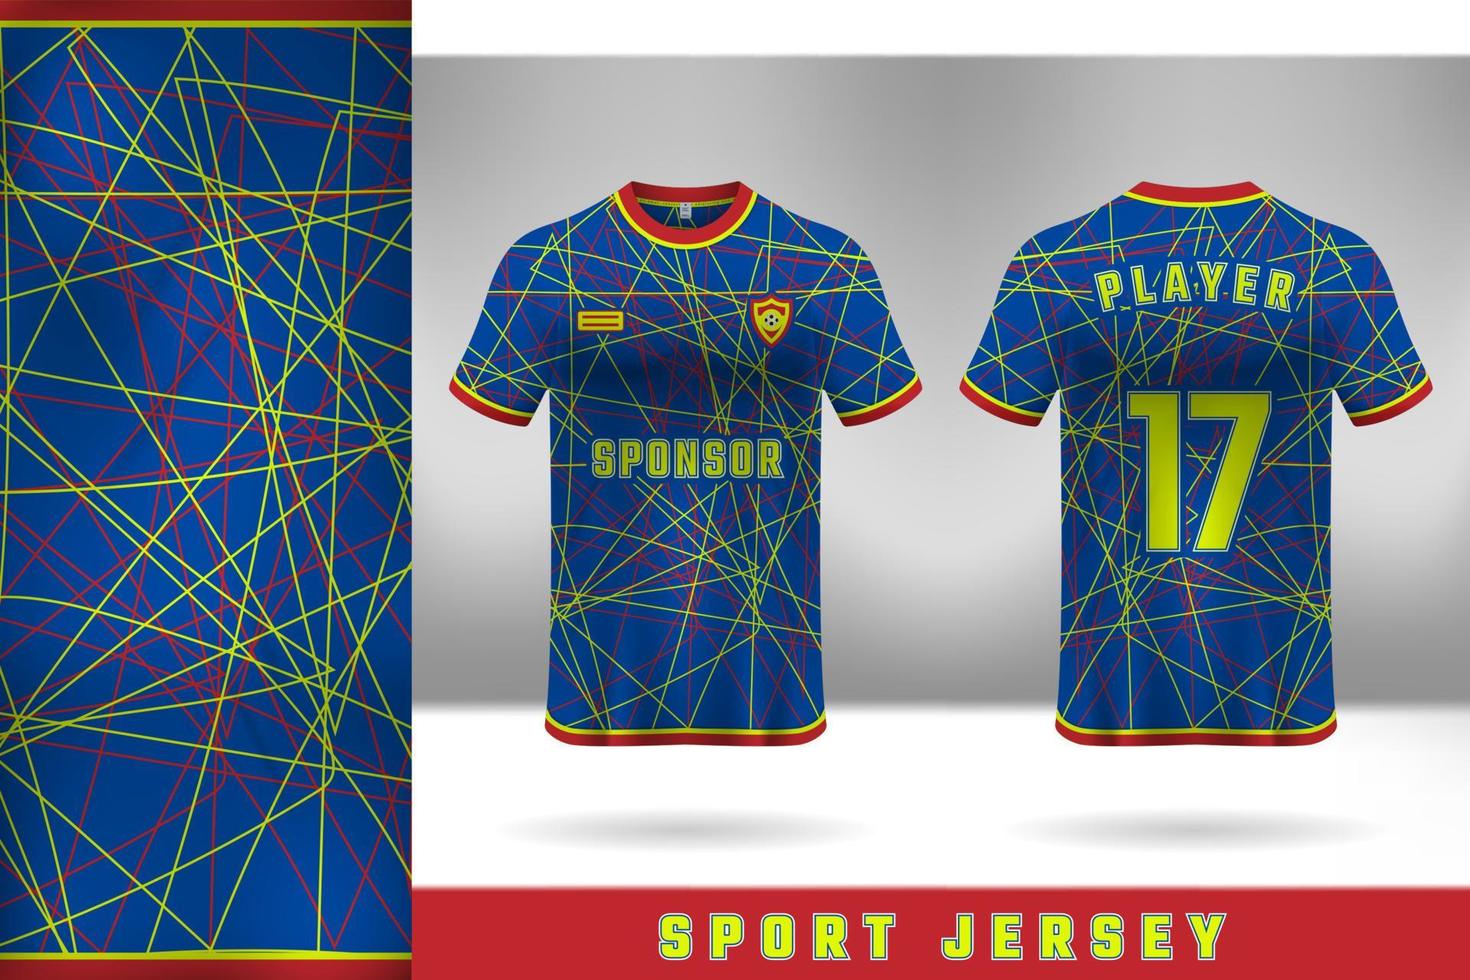 Red, yellow and blue jersey template designs for sports uniforms vector